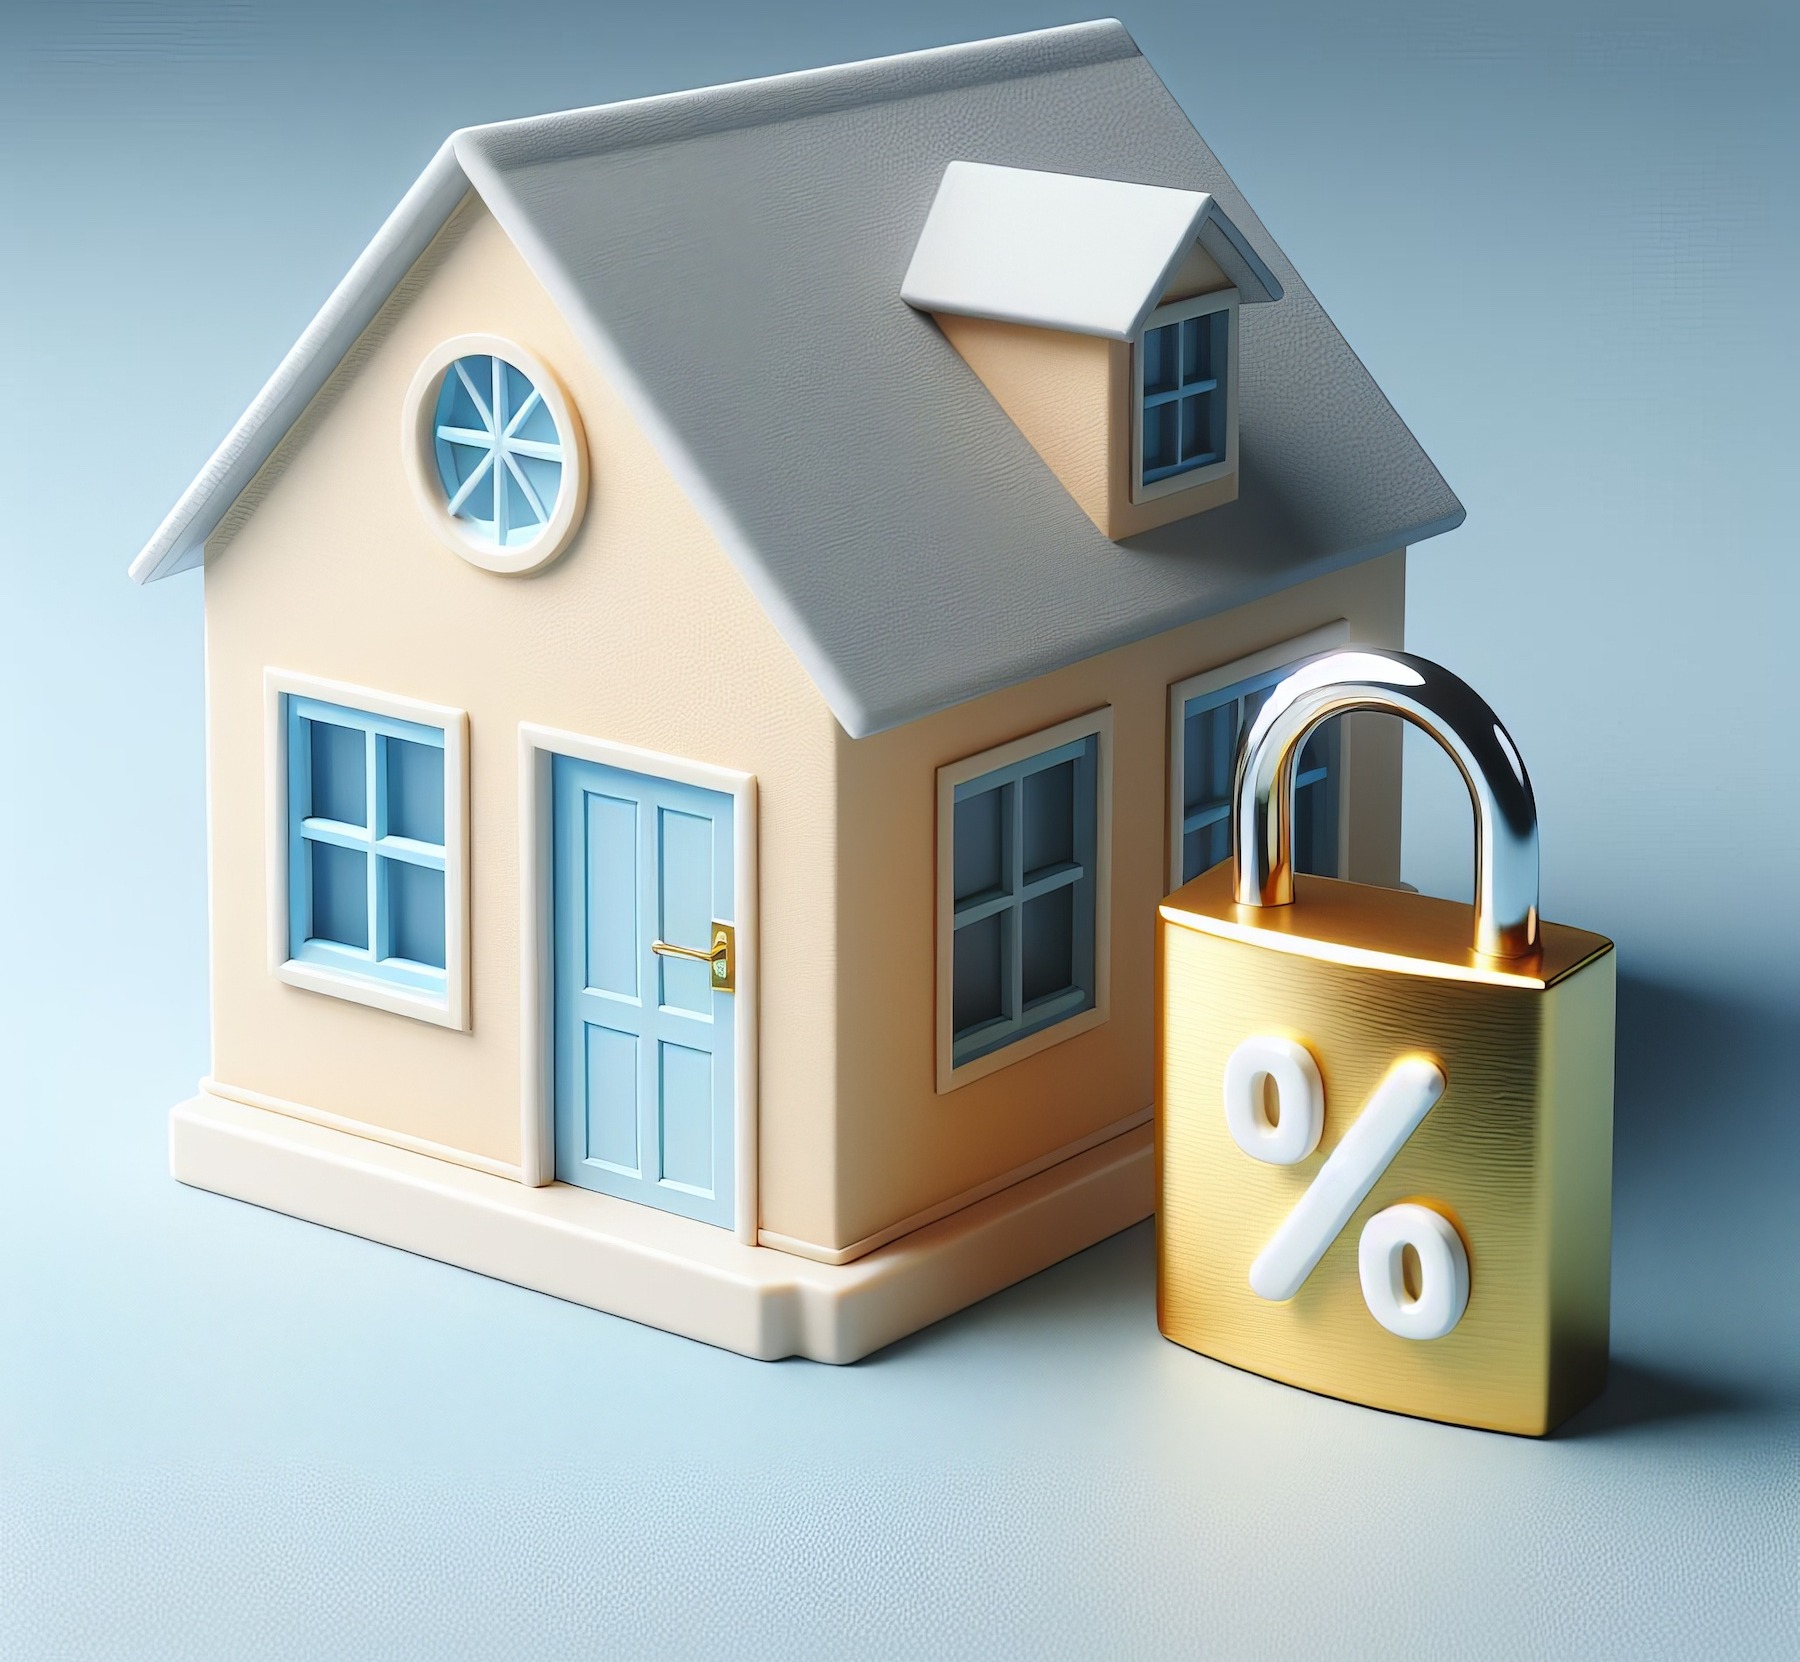 3D illustration of a small house with a large percentage sign lock